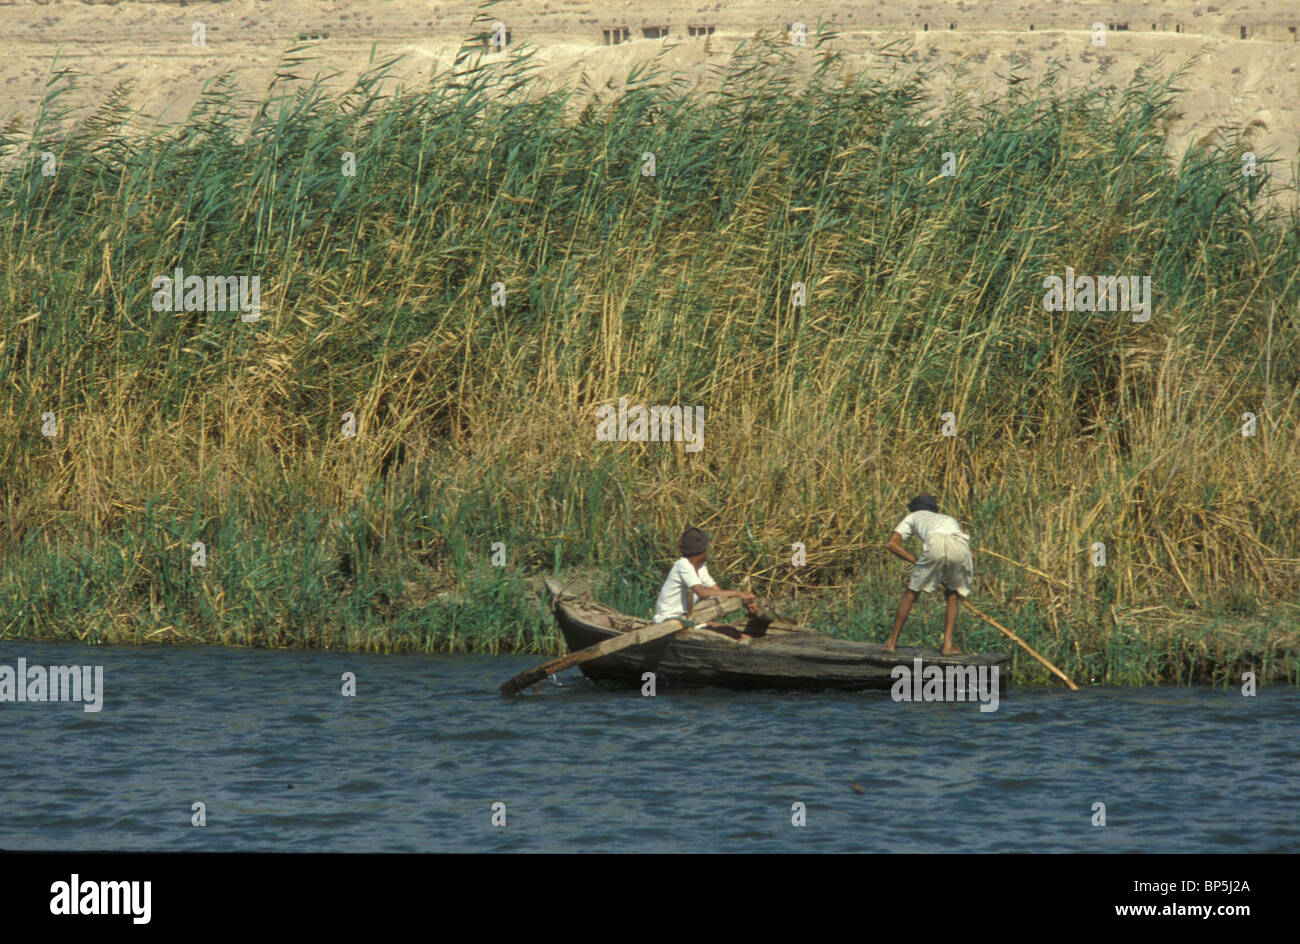 3491. NILE - THE VEGETATION ALONG THE SHORES OF THE RIVER IS MAUNLY PAPYRUS AND REEDS USED FOR BUILDING AND ANIMAL FOOD Stock Photo